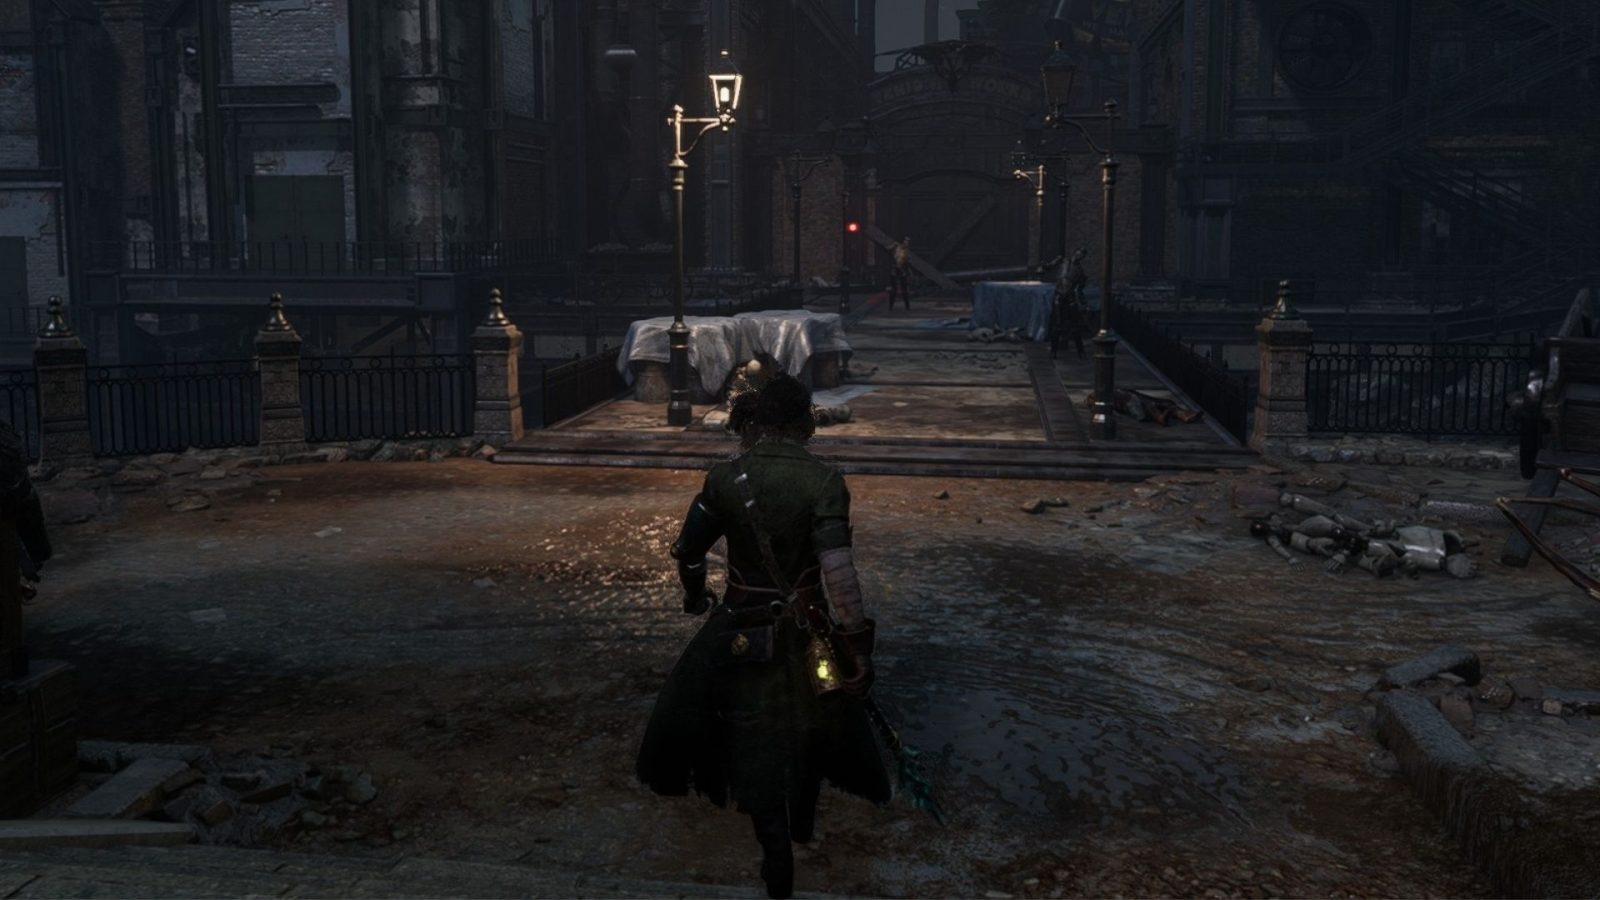 Bloodborne may have a finished but unreleased PC version - Dexerto